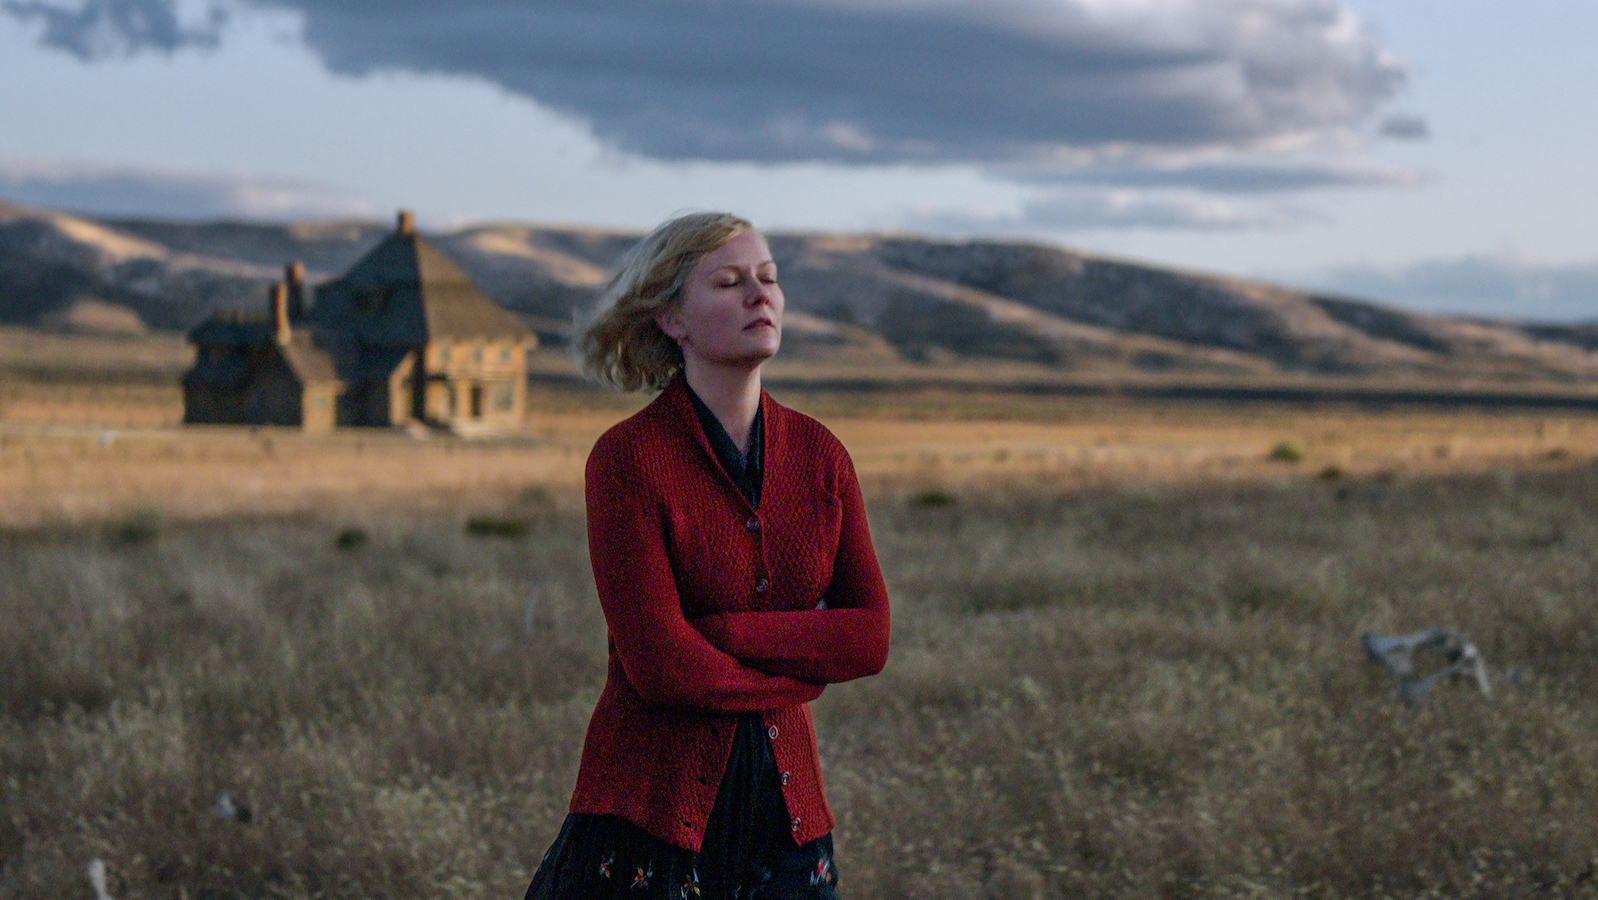 A woman (Kirsten Dunst) in a red sweater stands with her arms crossed against a vast Montana mountain landscape.